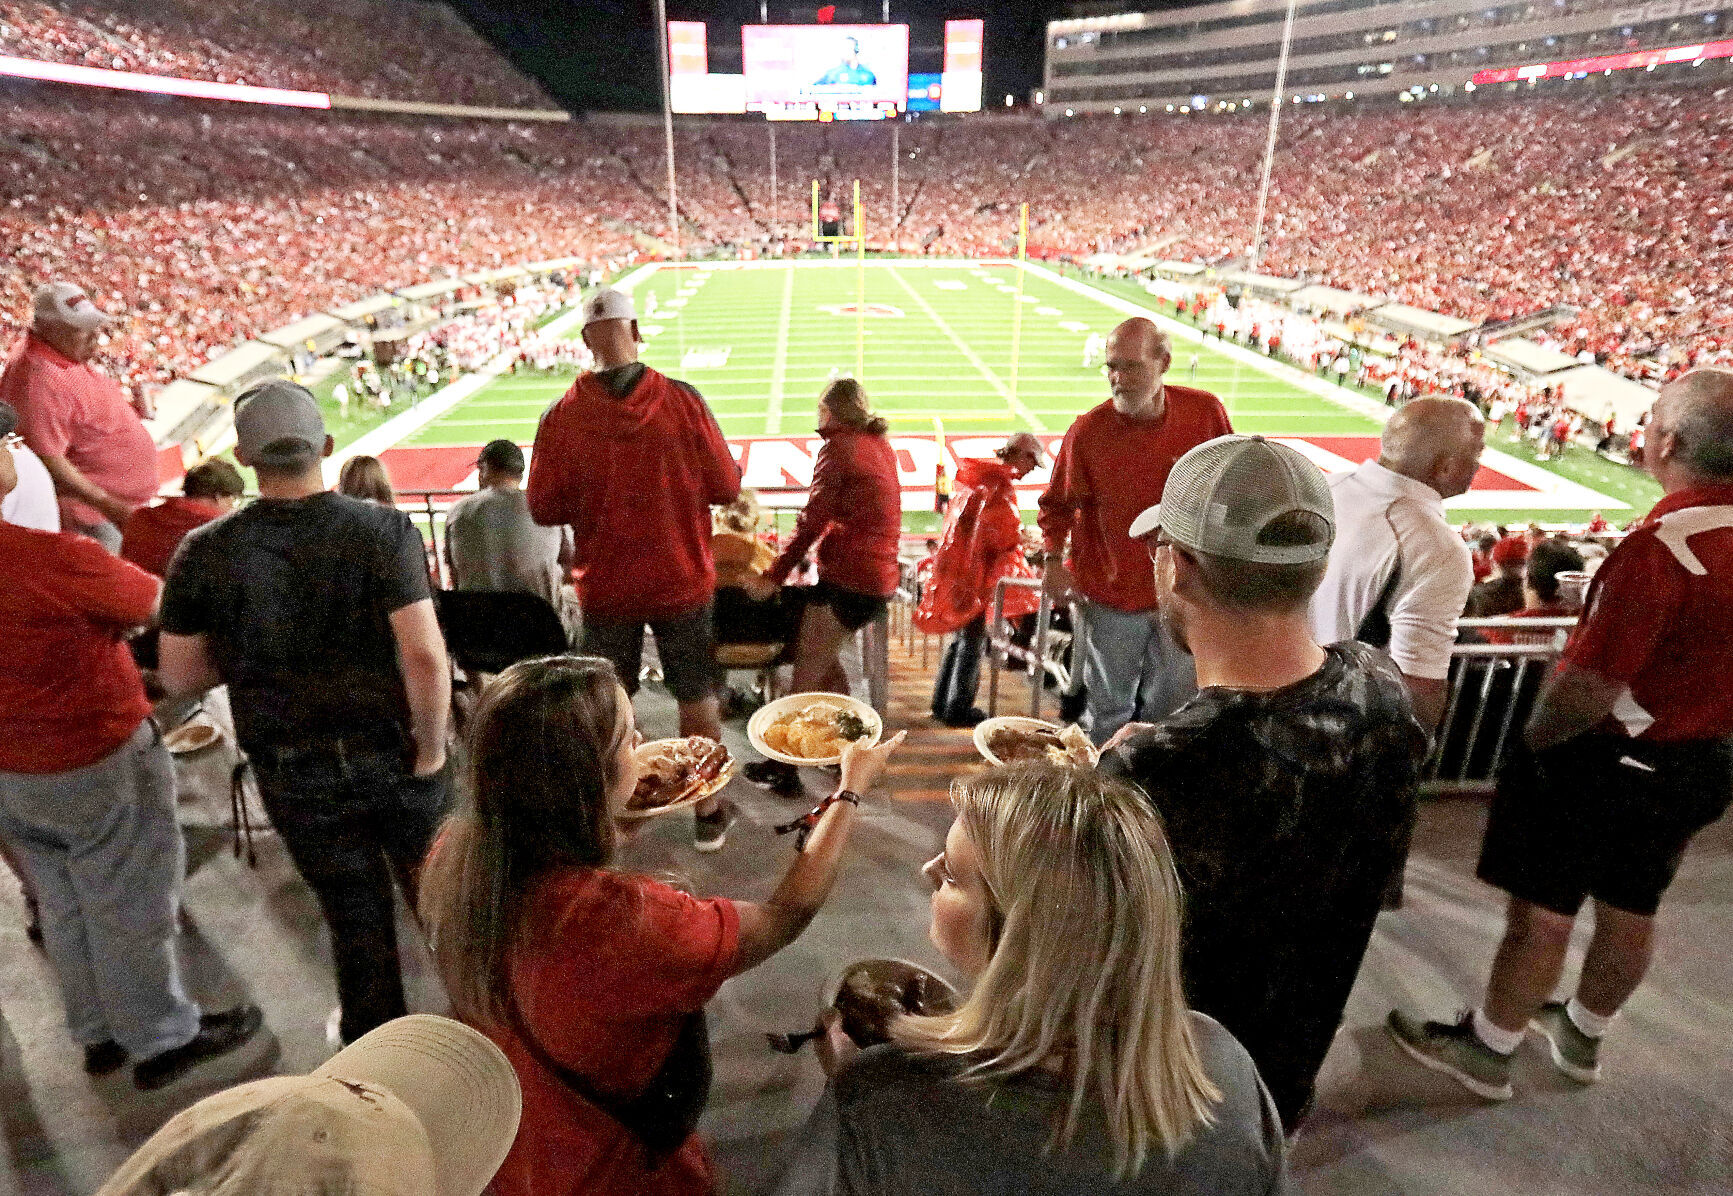 A new pavilion, beer and a blowout Wisconsin football back at Camp Randall